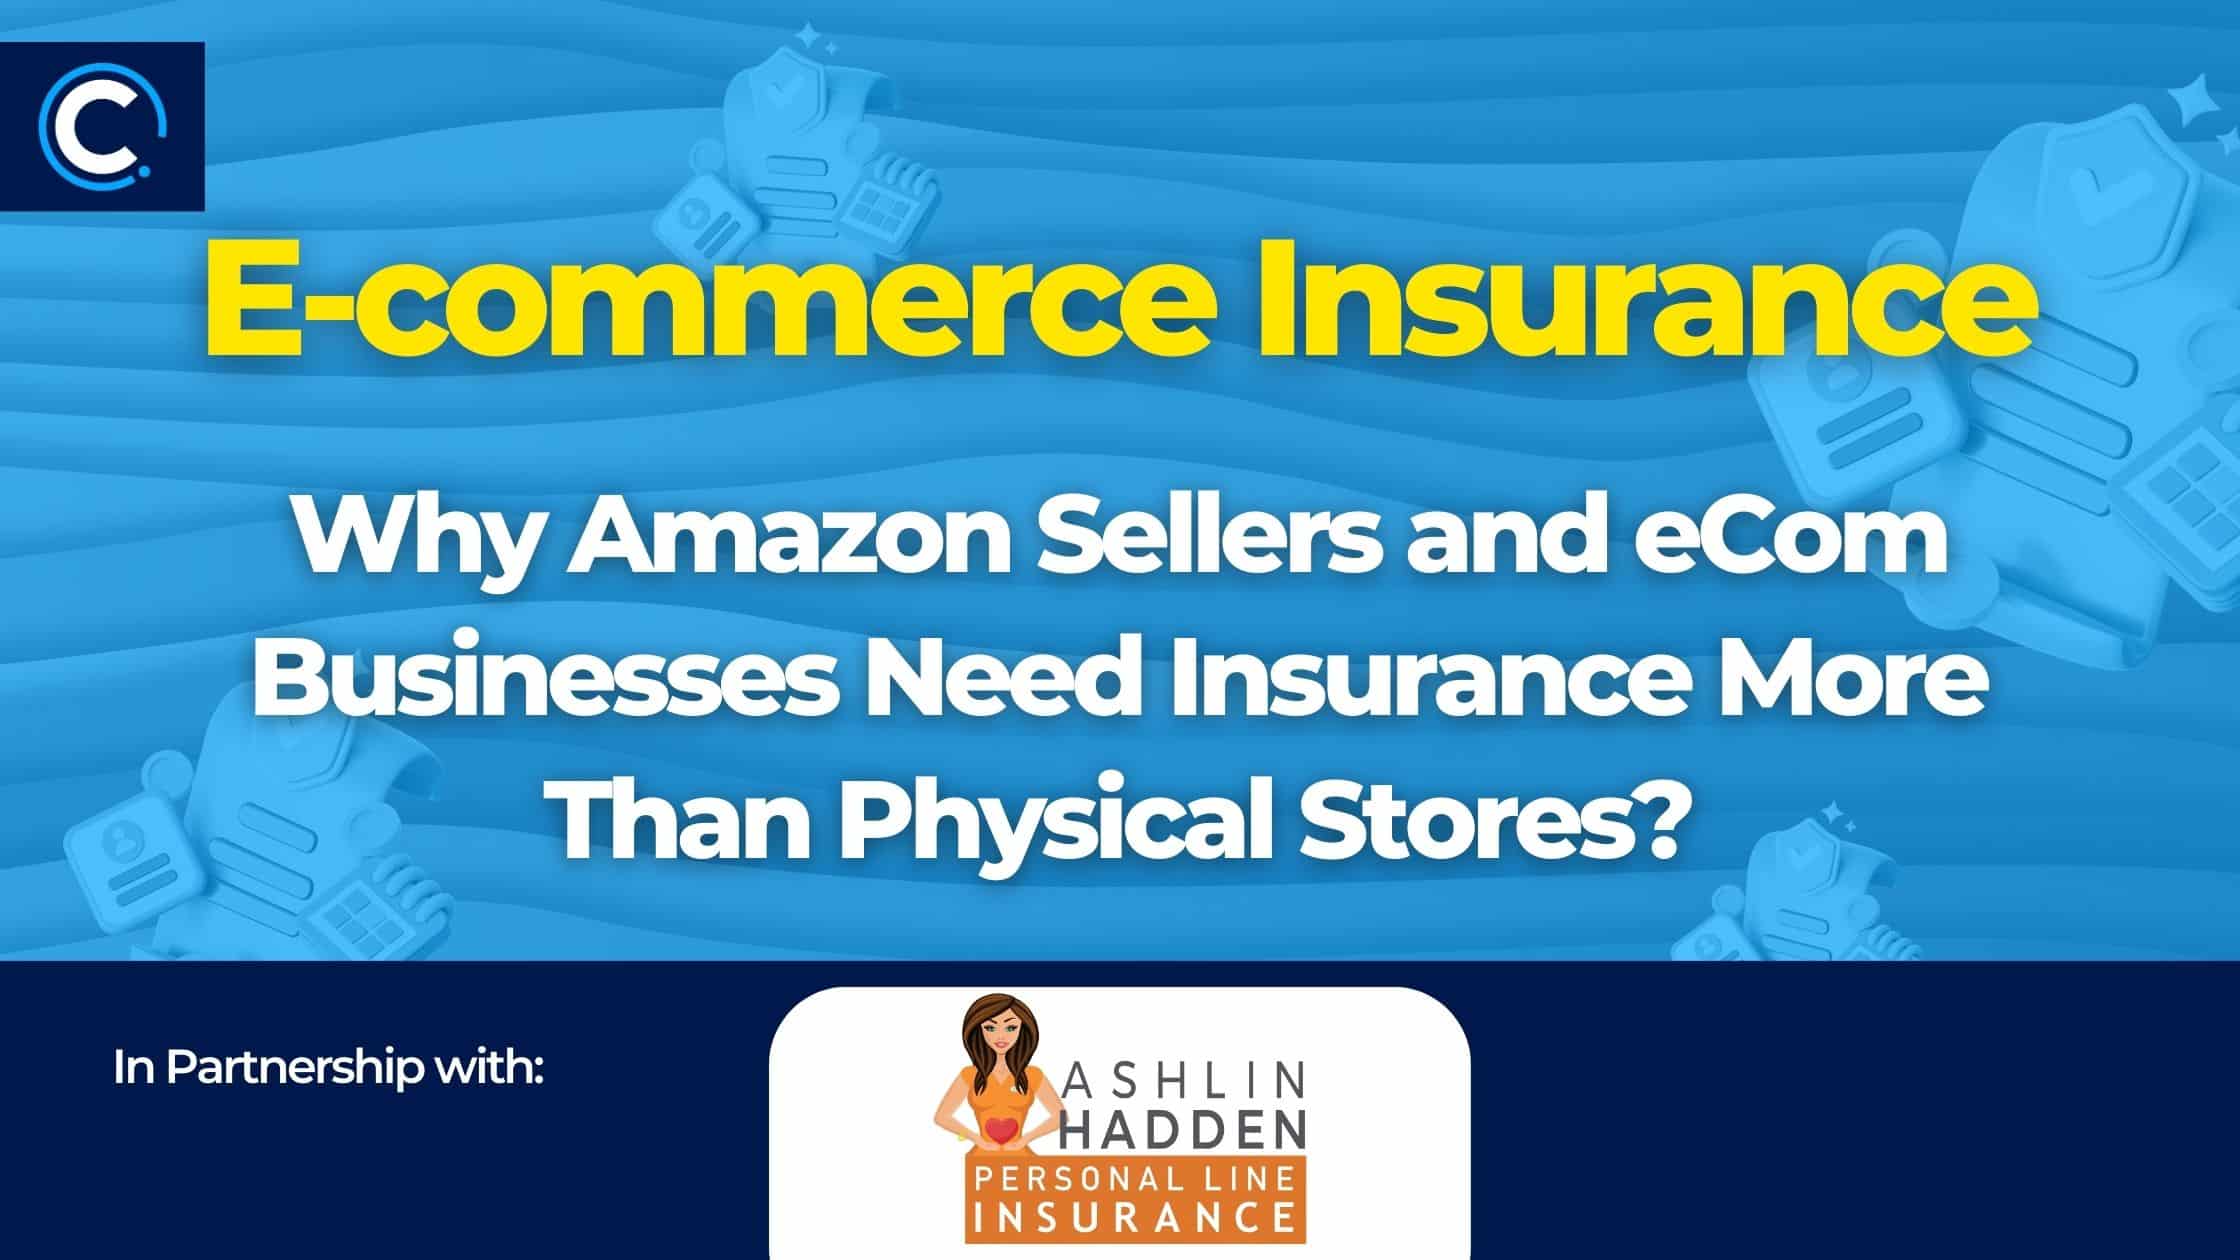 E-commerce Insurance Why Amazon Sellers and eCom Businesses Need Insurance More Than Physical Stores?